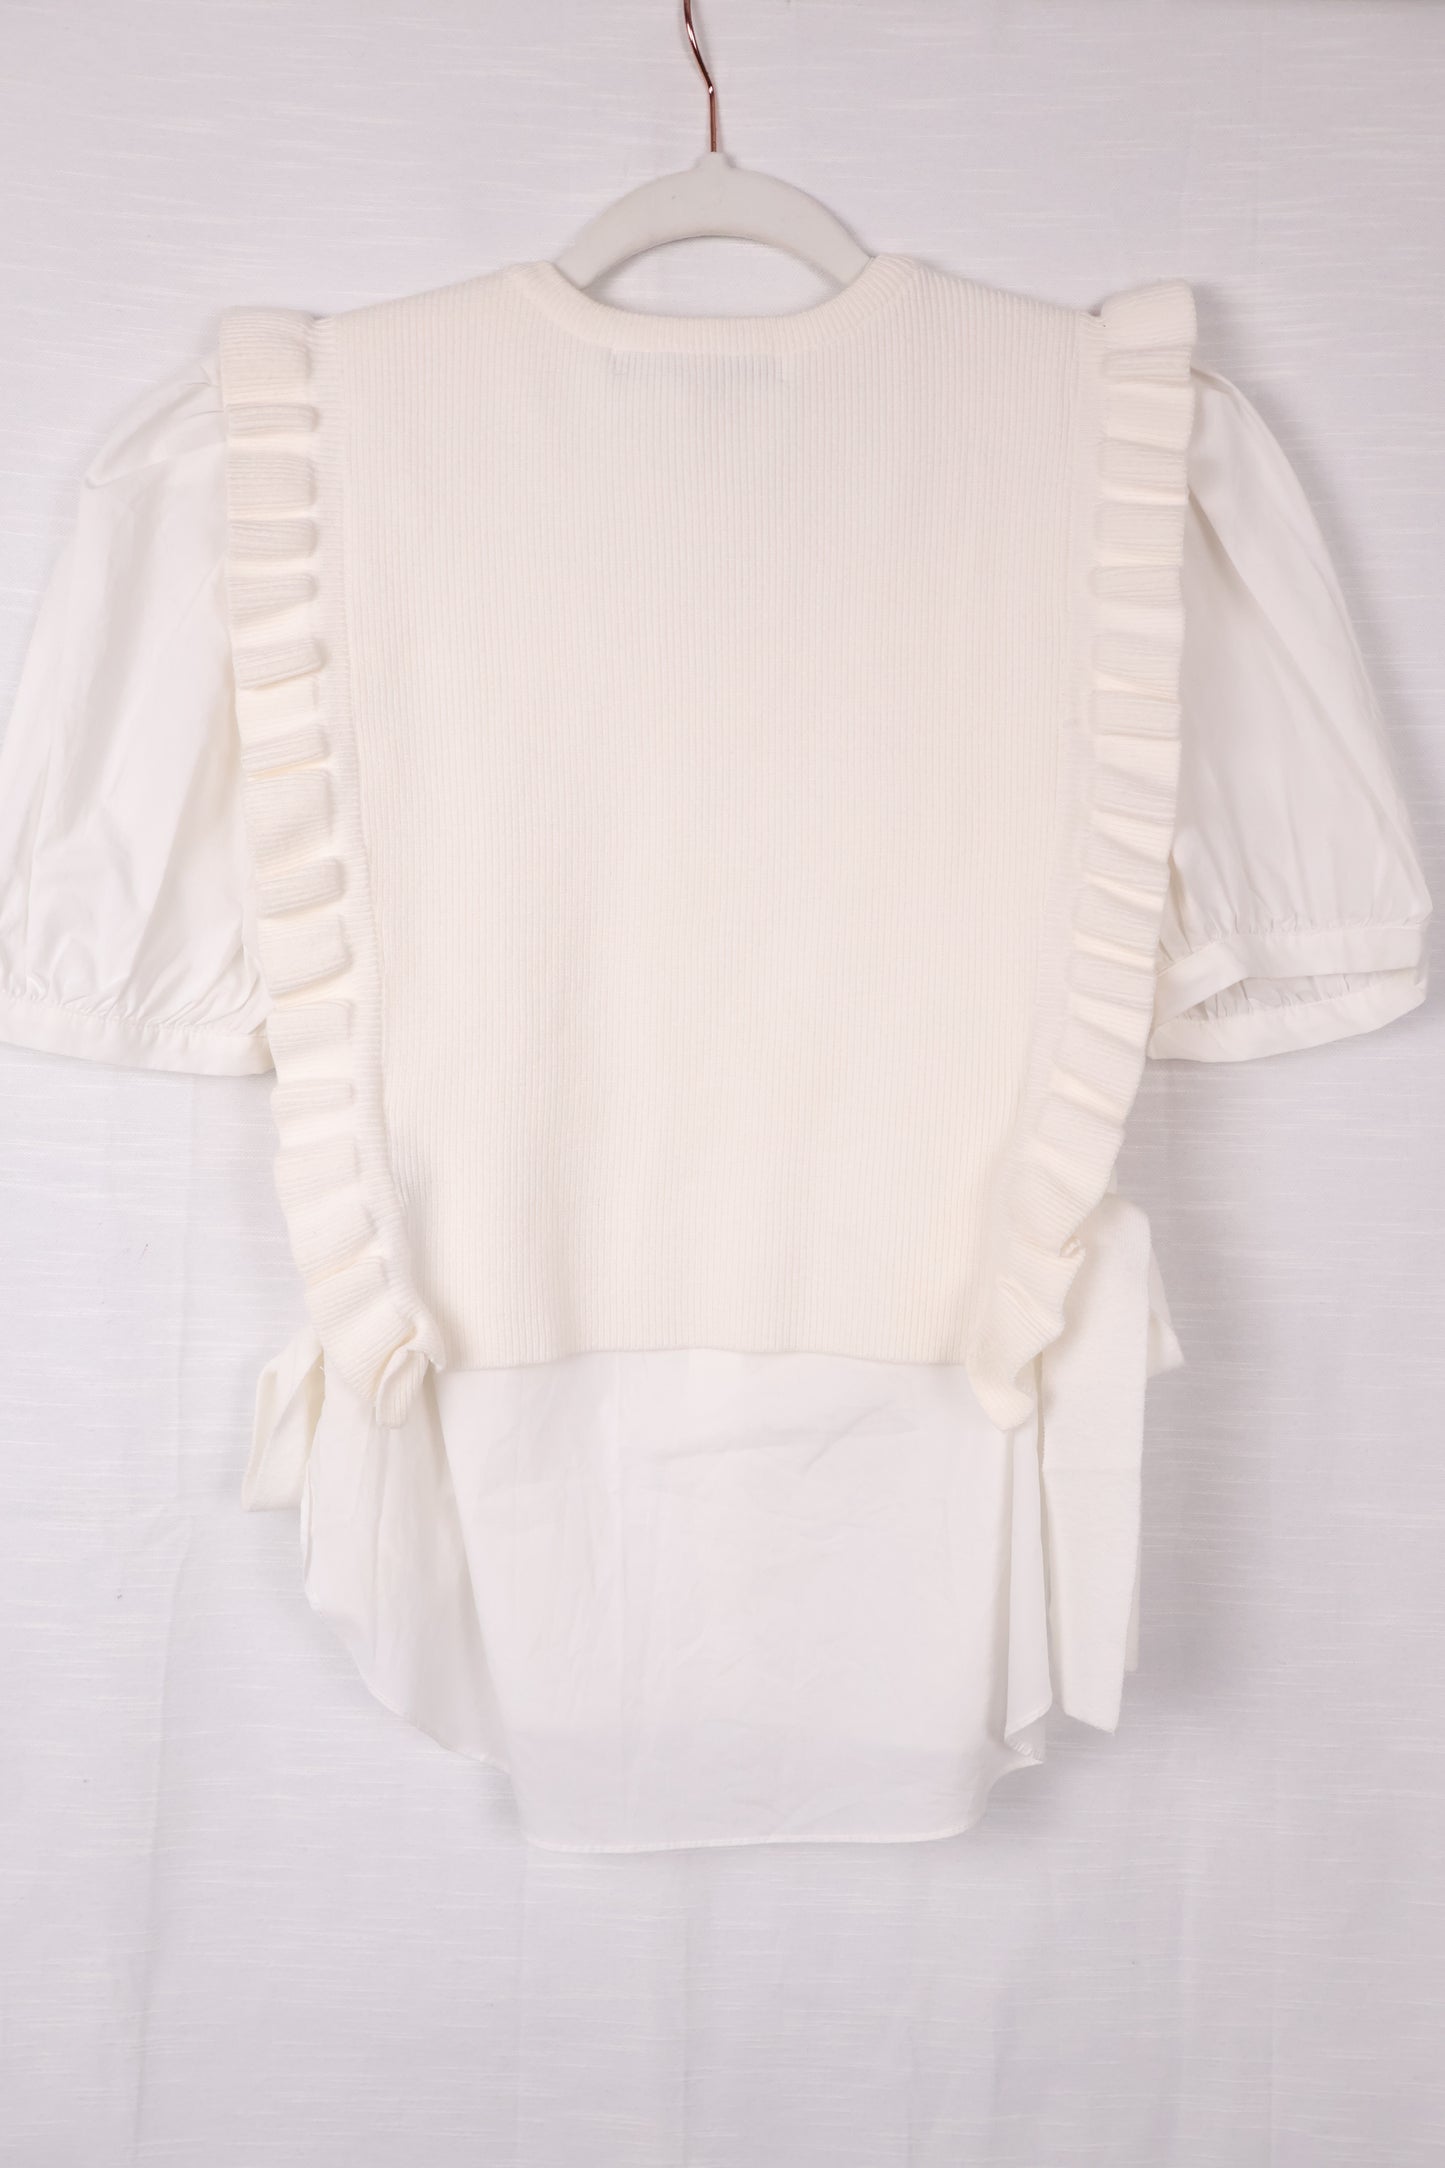 White Blouse with Sleeveless Crème Sweater